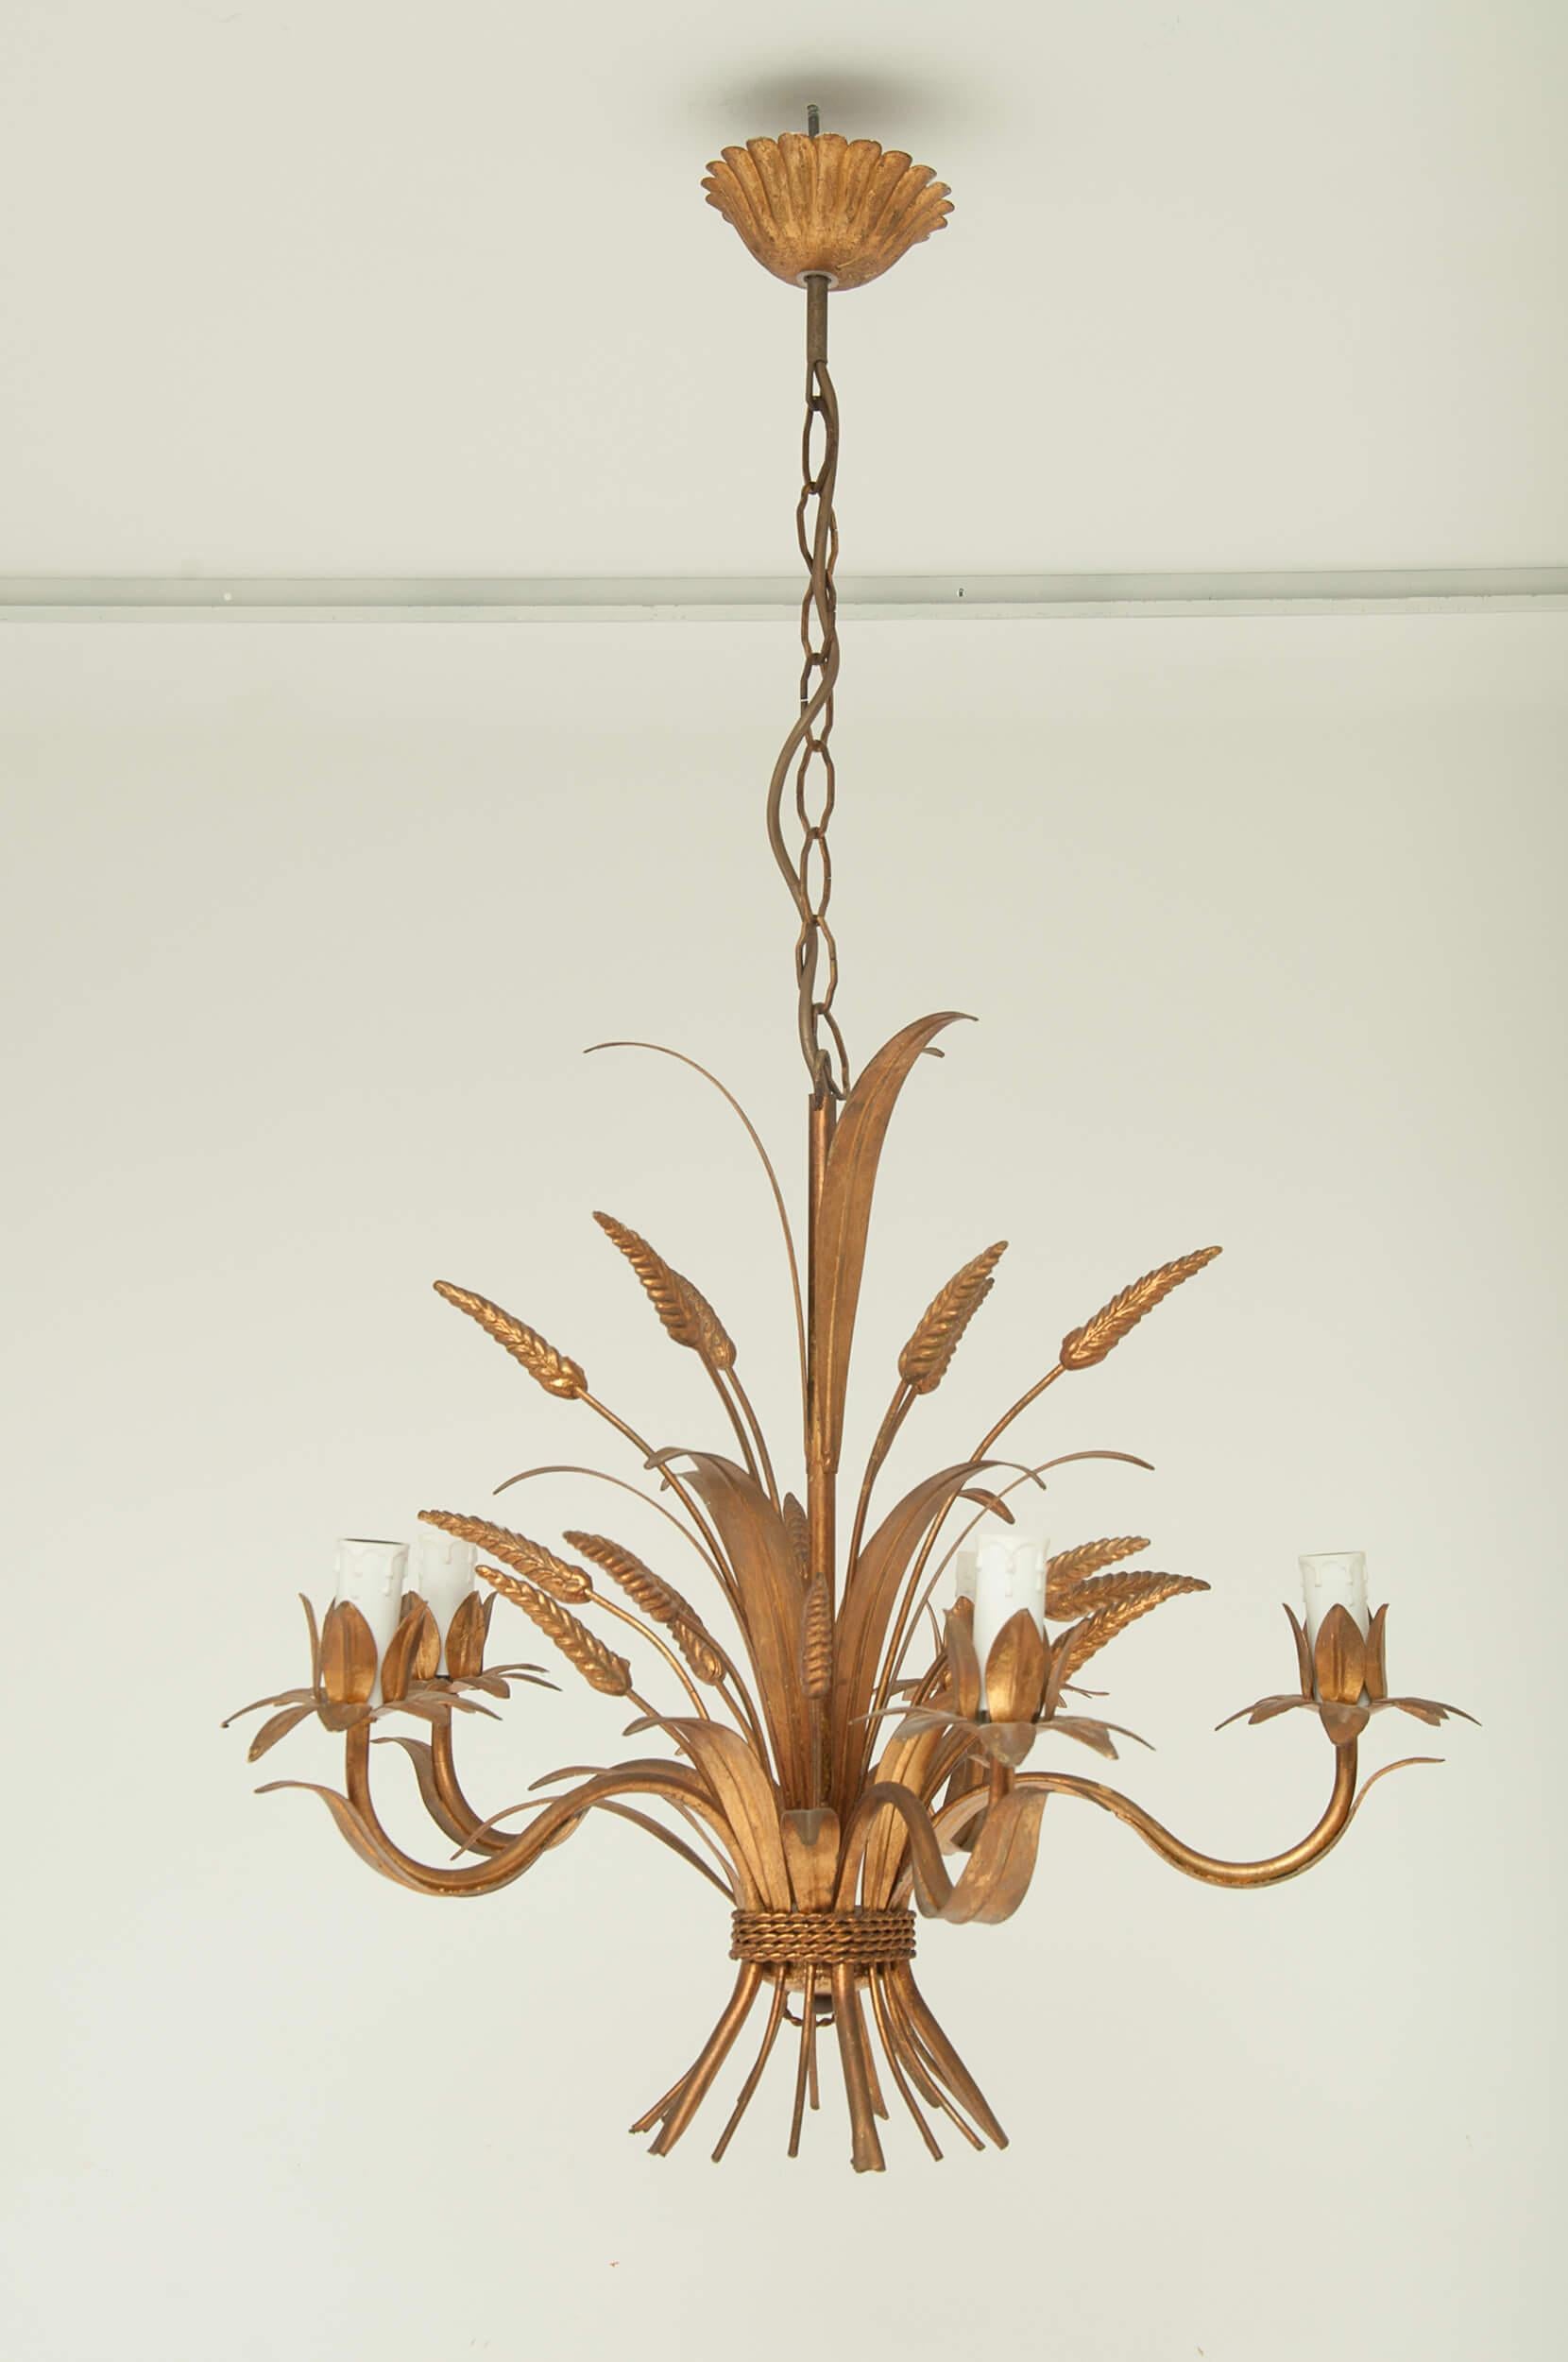 Mid-20th Century Chandelier in the Style of Maison Jansen, in Guilt Metal, Wheat Shaped Lights